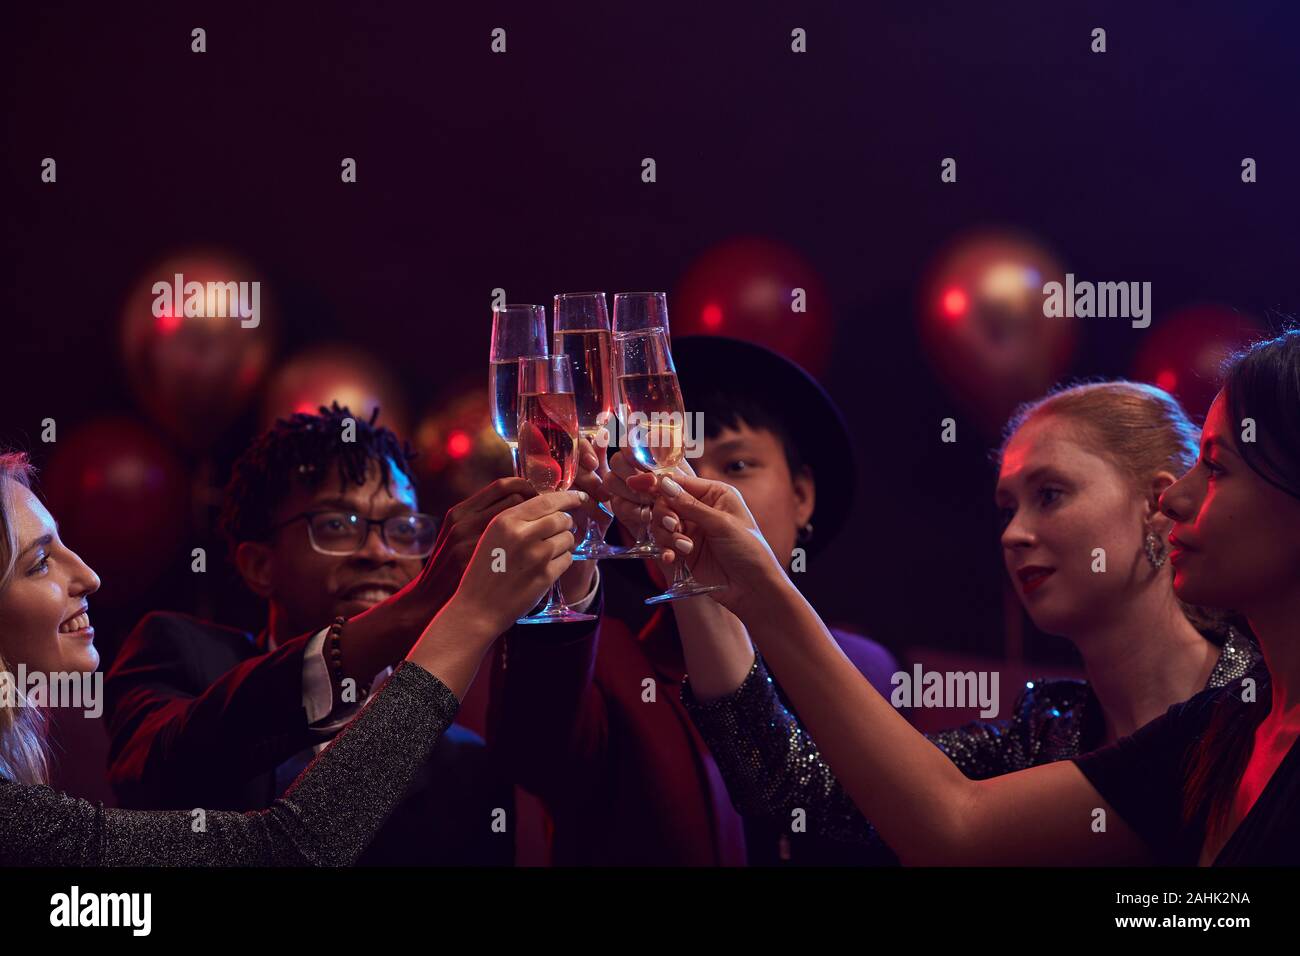 Group of elegant young people raising champagne glasses while enjoying party in nightclub, copy space Stock Photo